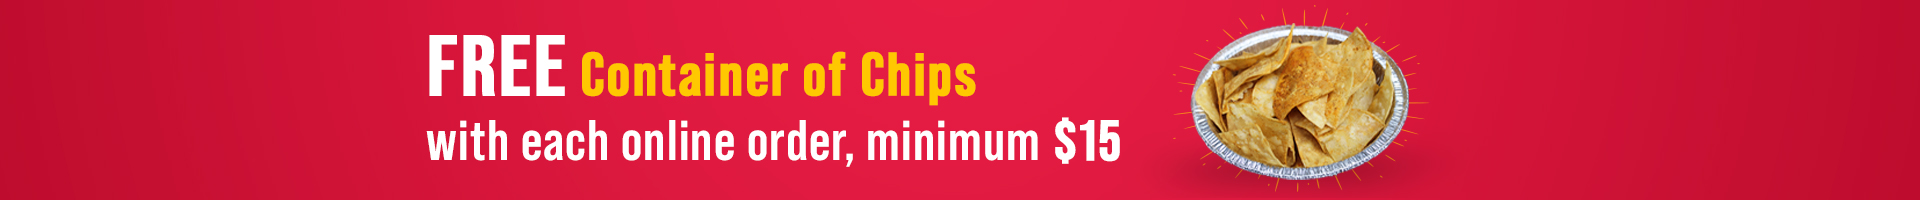 Free Container of Chips